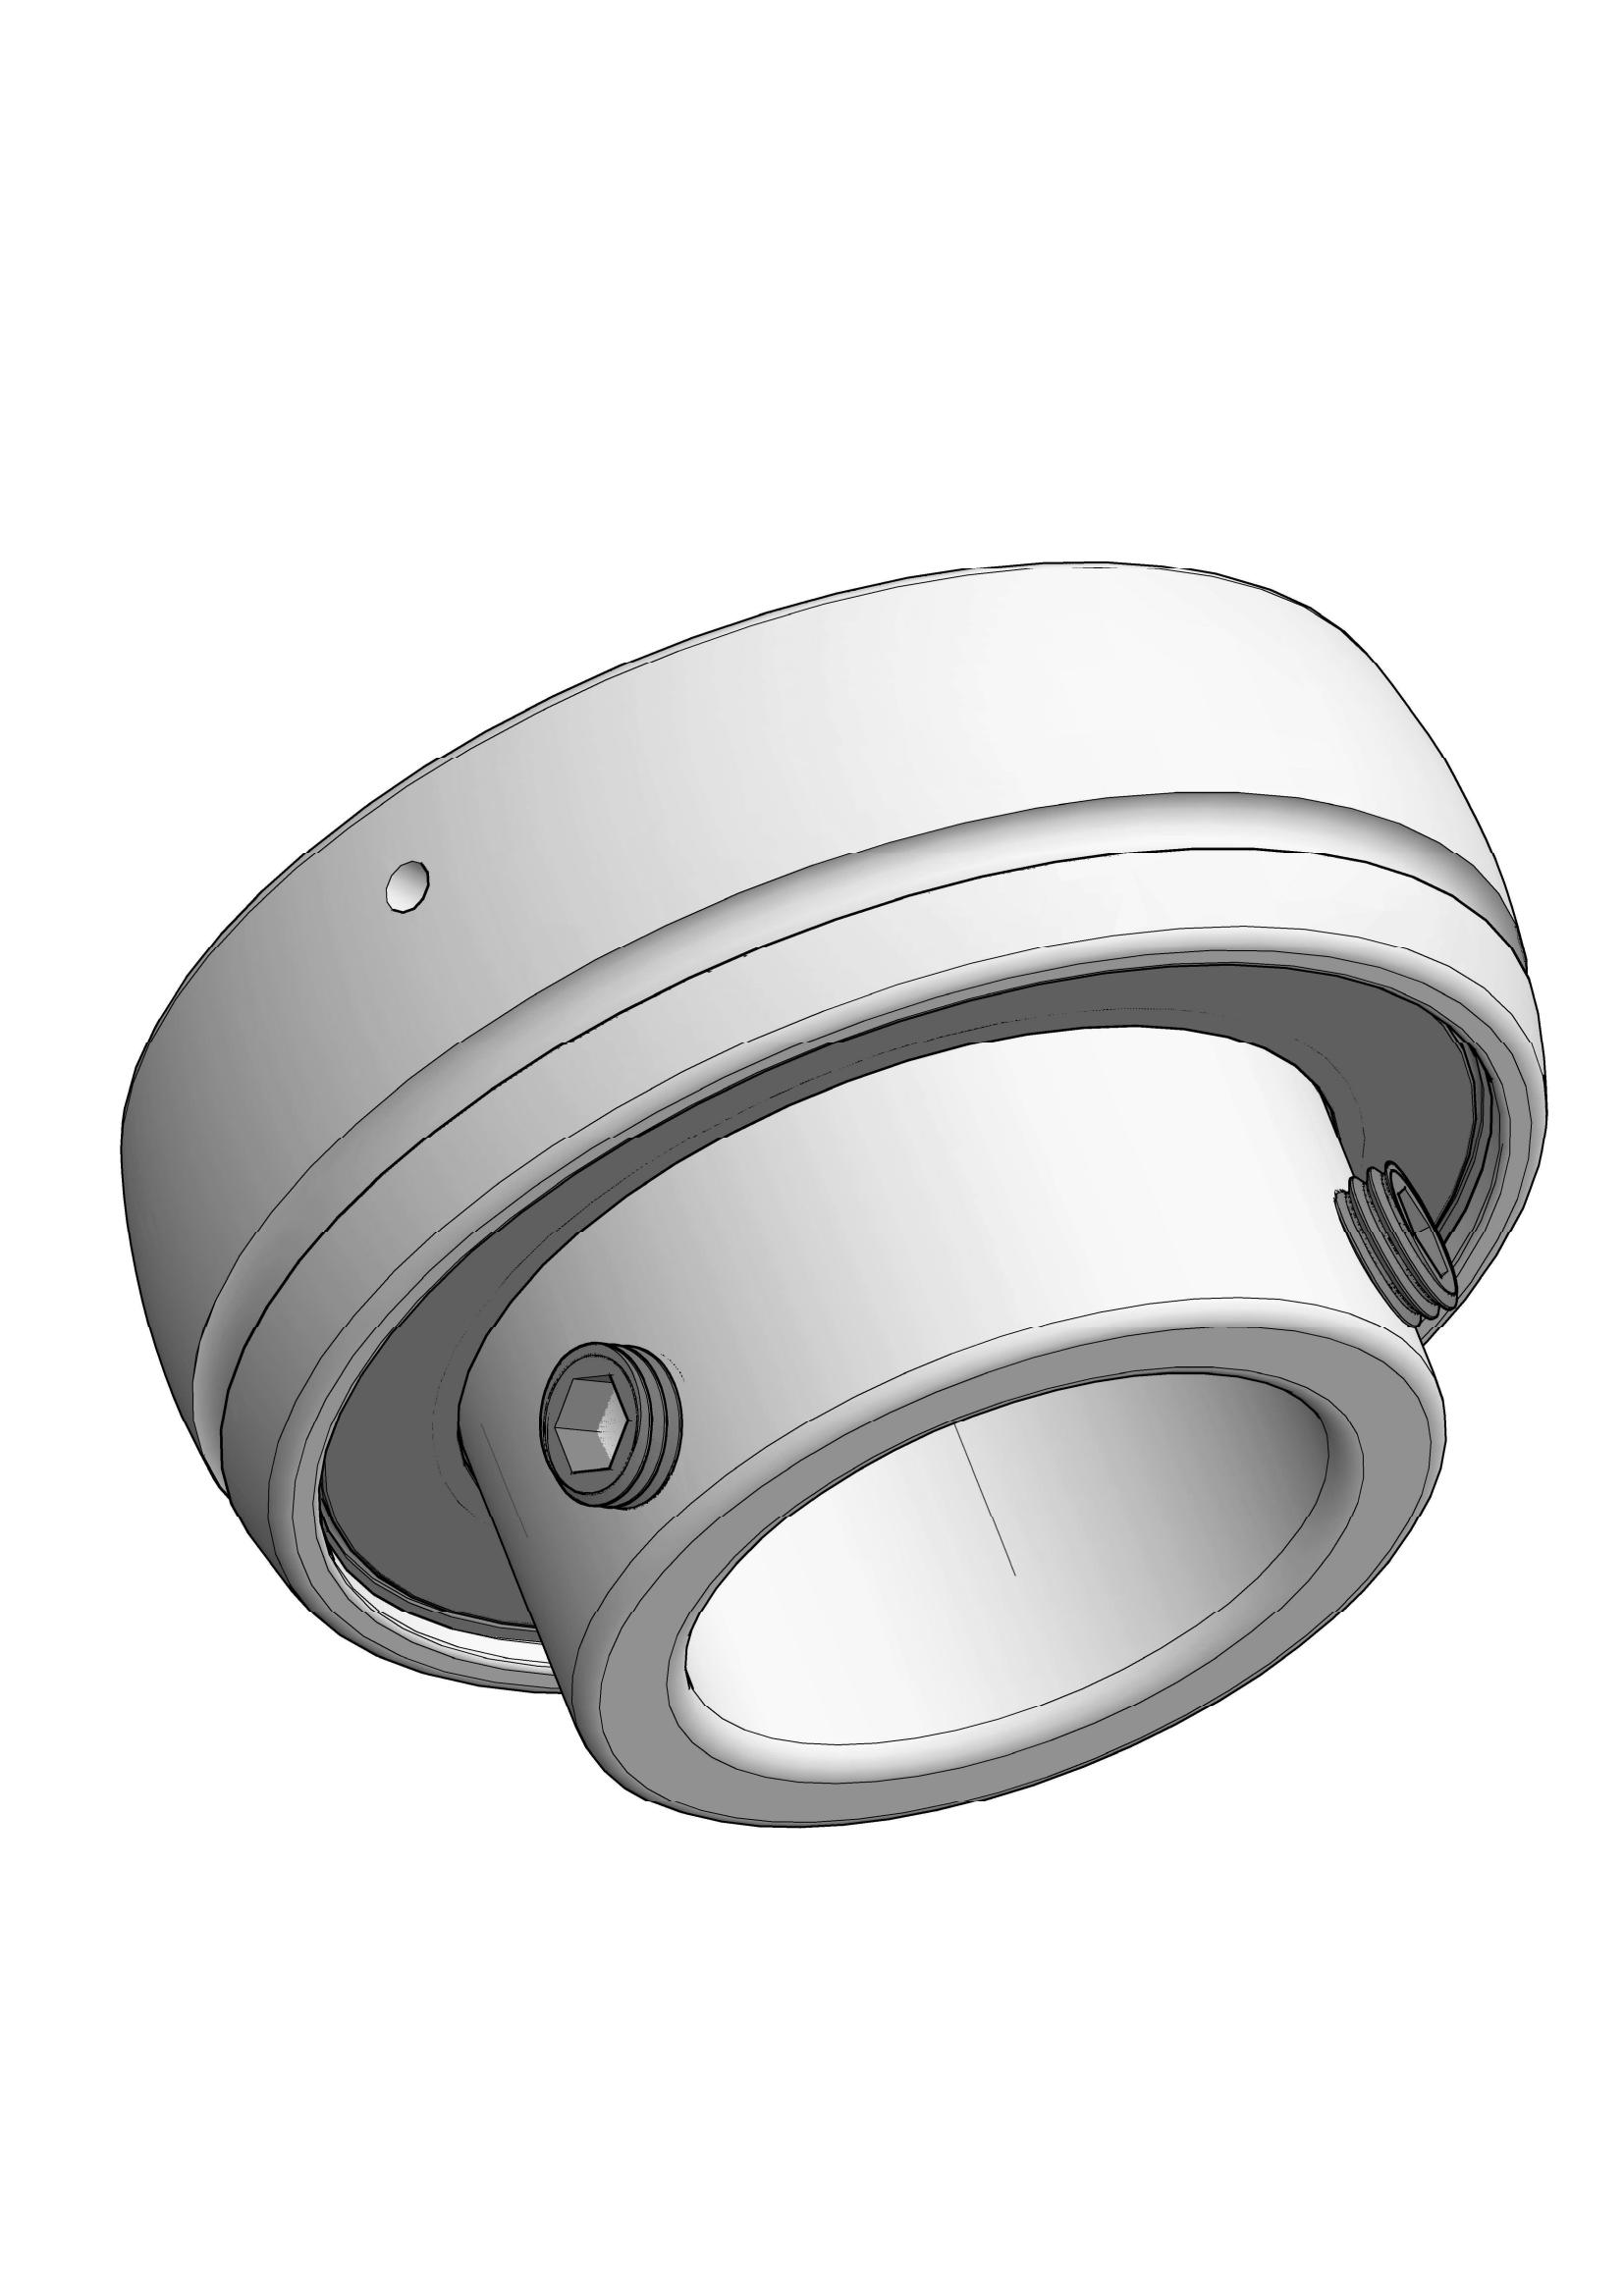 SB210-30 insert ball bearings with Eccentric Collar Lock with 1-7/8 inch Bore